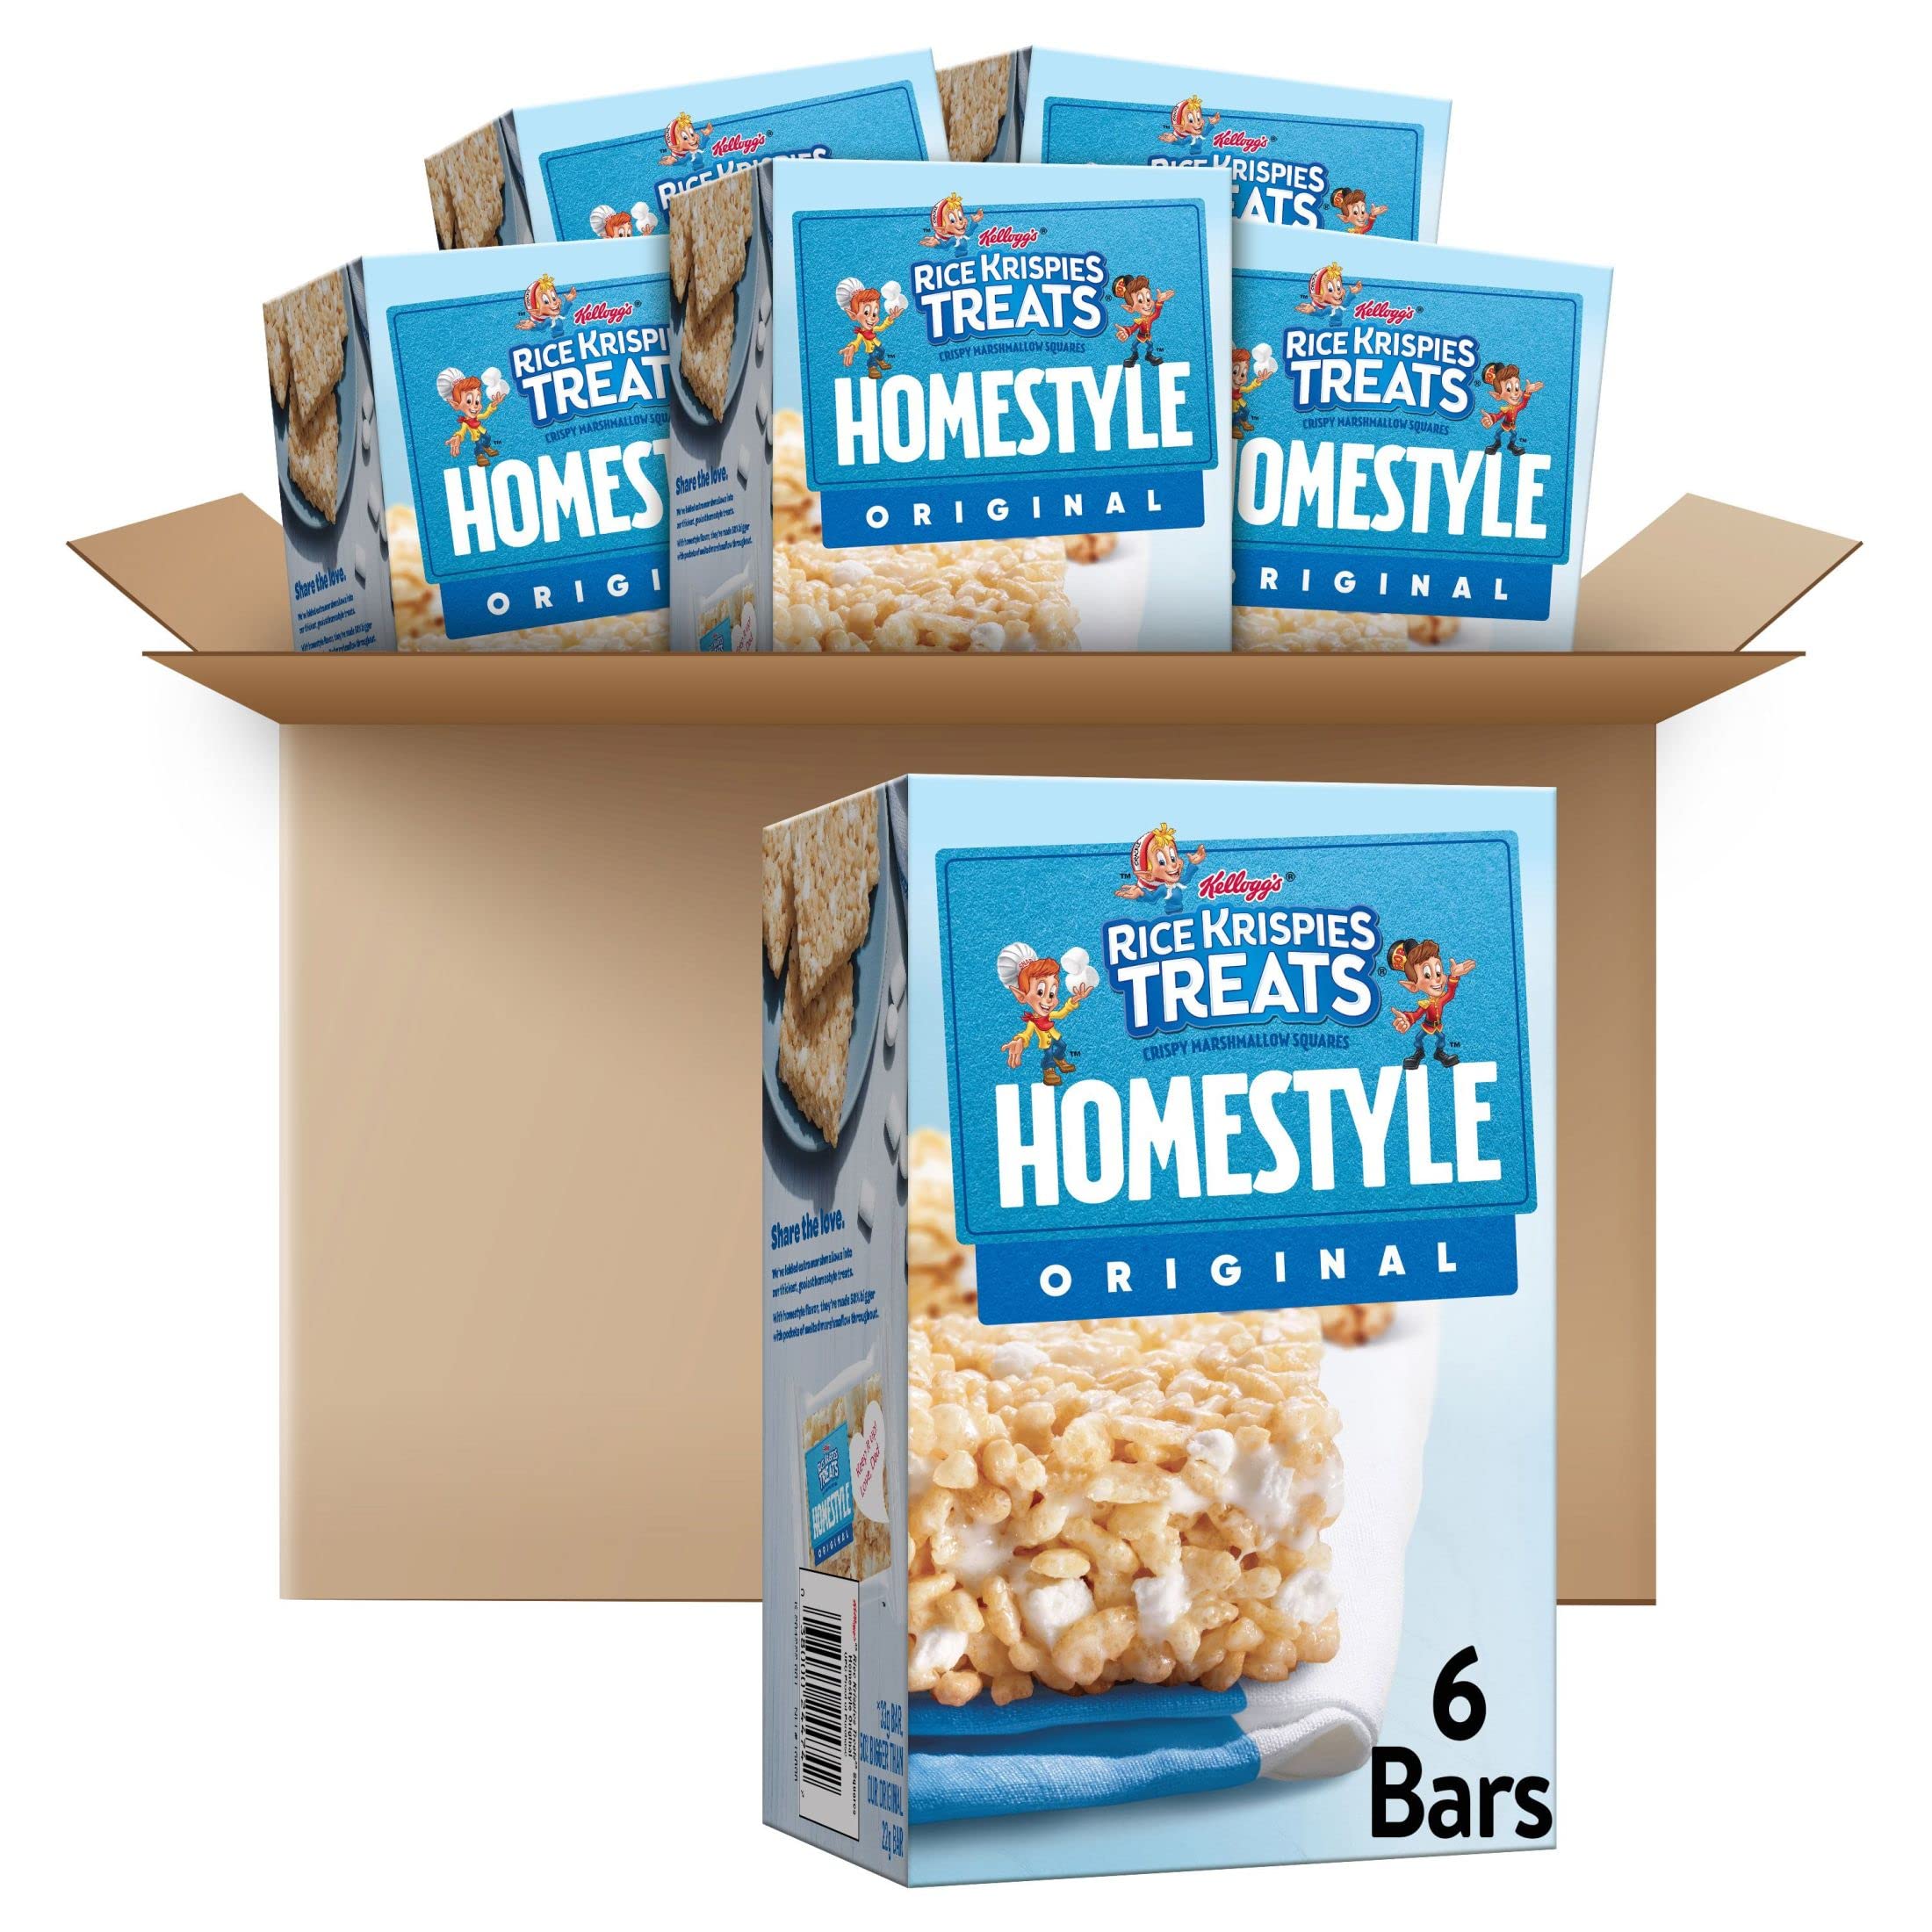 6-Count of 6-Pack 1.16-Oz Rice Krispies Treats Homestyle Original Marshmallow Snack Bars $15 ($2.50 each, 36 bars total, $0.42 per bar) w/ S&S + Free Shipping w/ Prime or on $35+